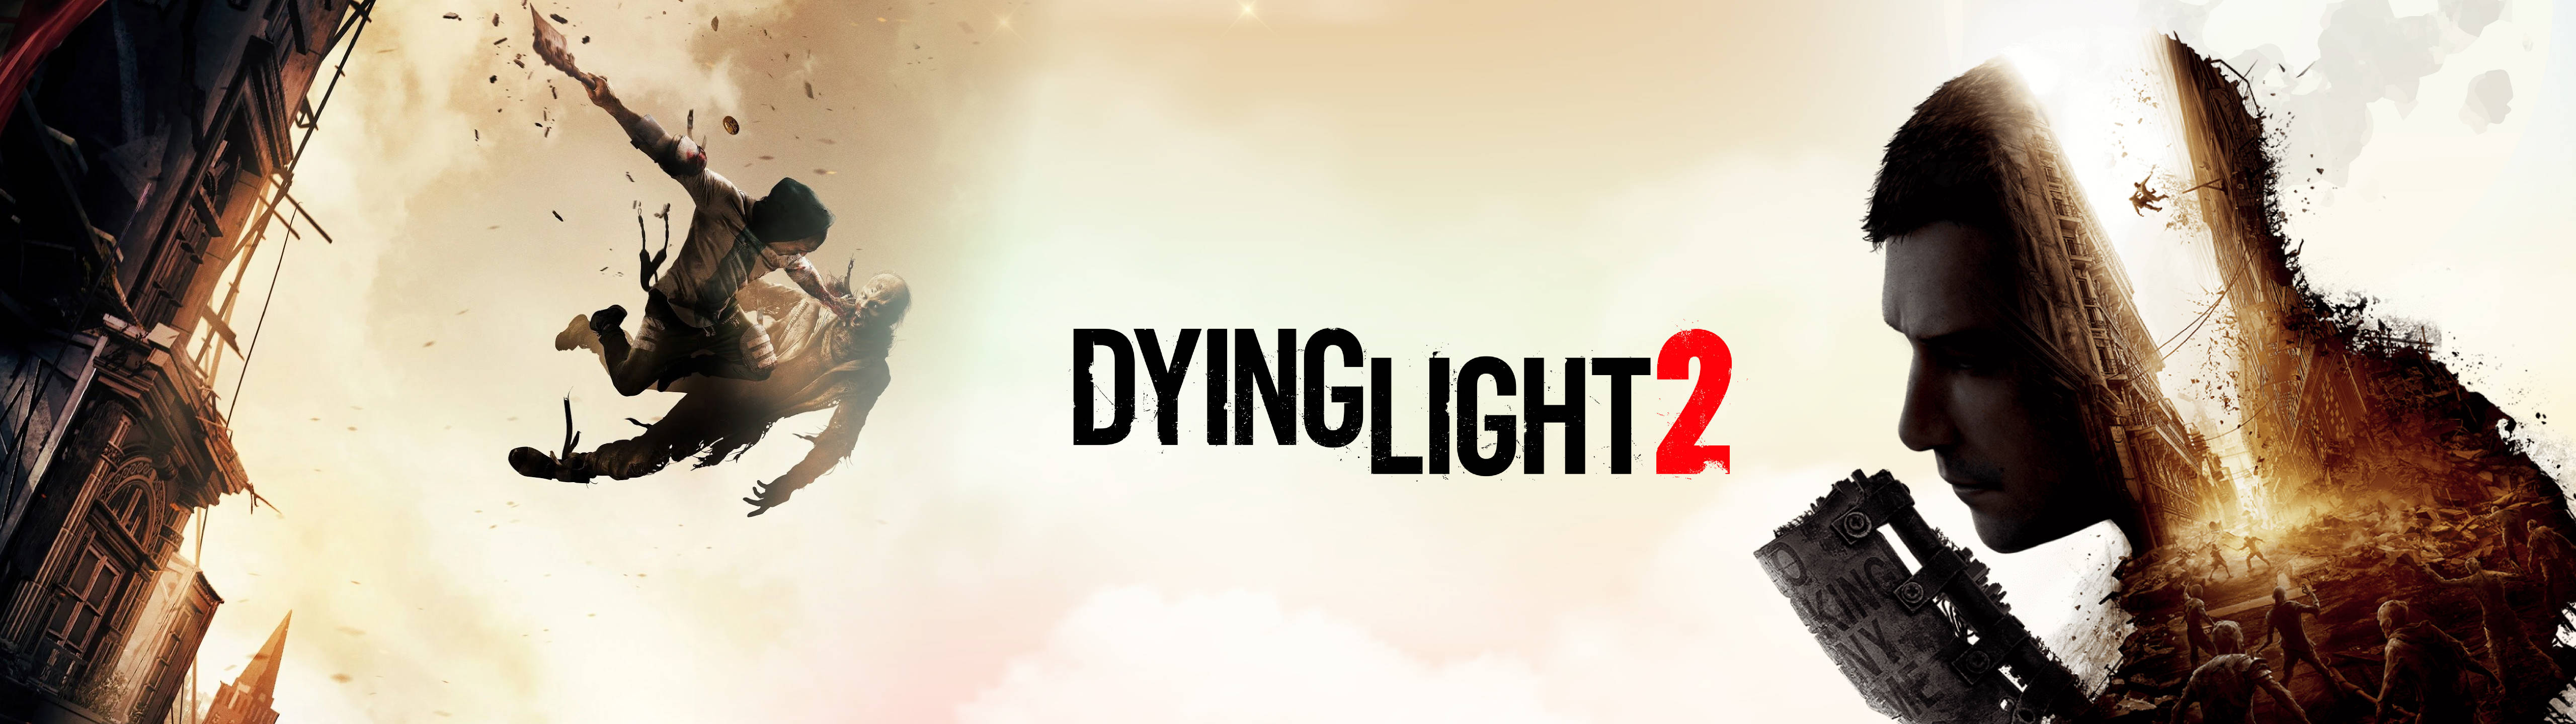 Dying Light 2 5120x1440 Gaming Background